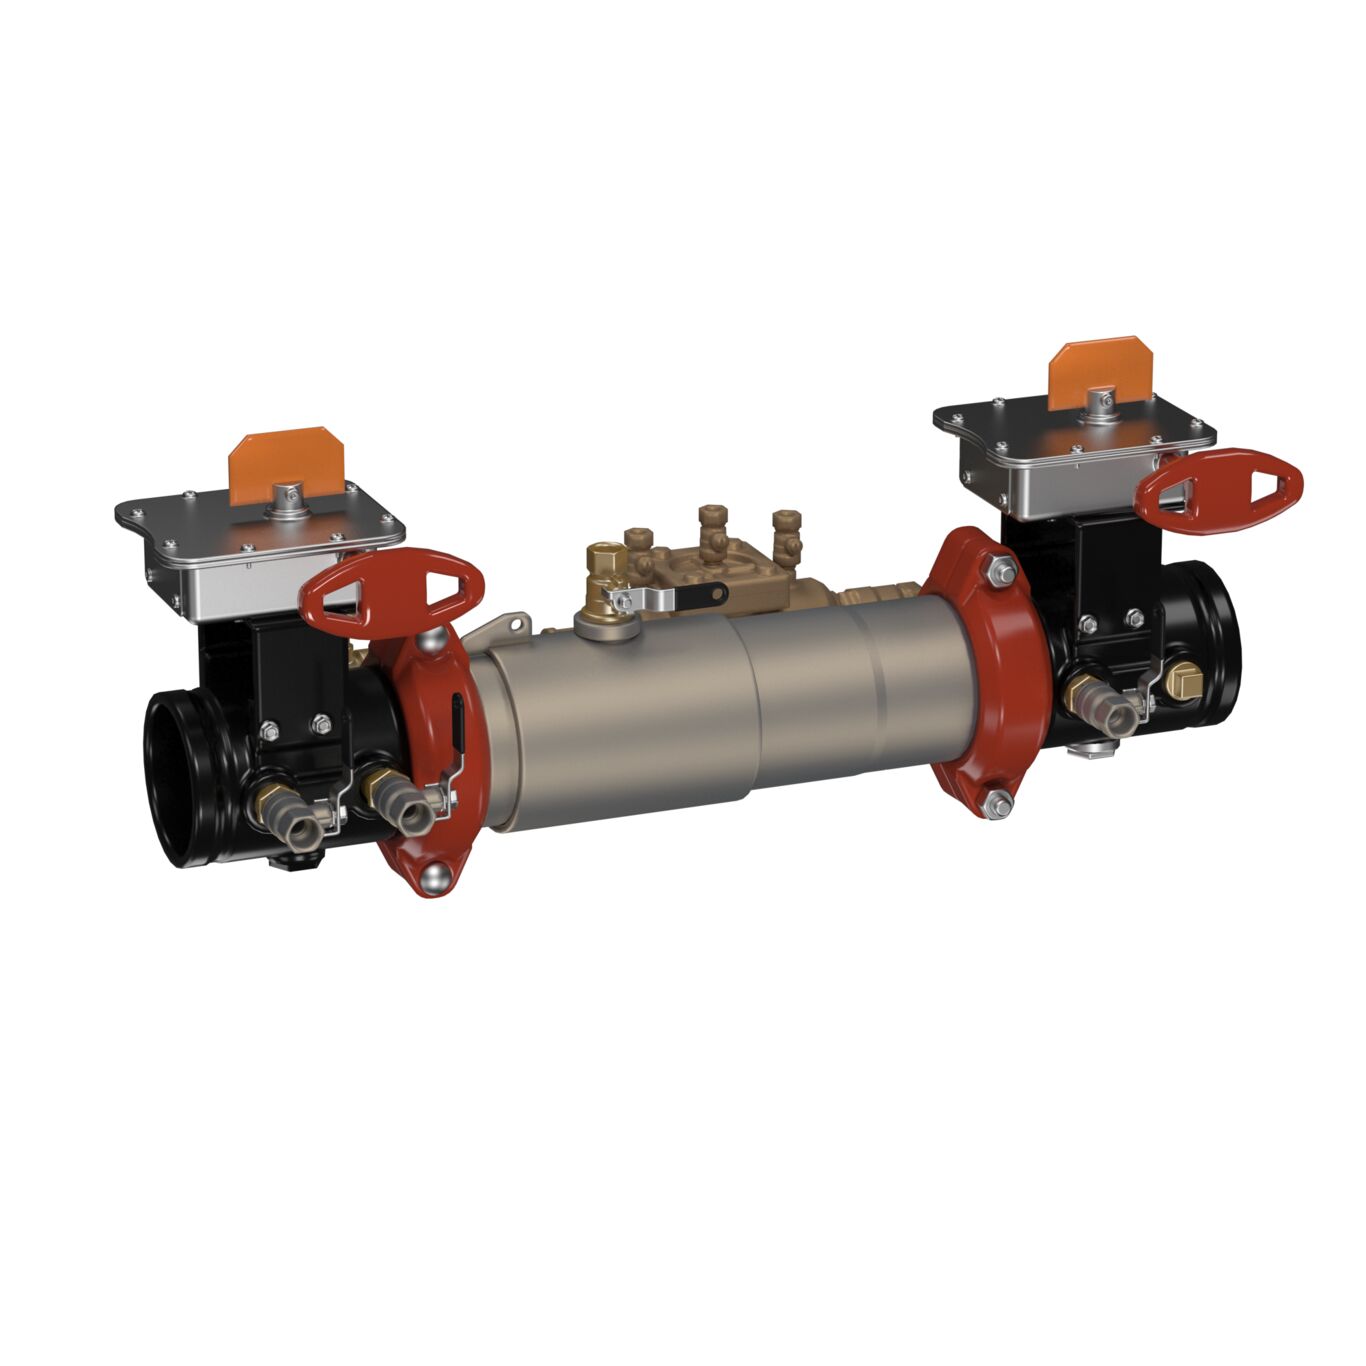 Stainless Steel Double Check Detector Assembly Backflow Preventers with Tri-Link Check Valves